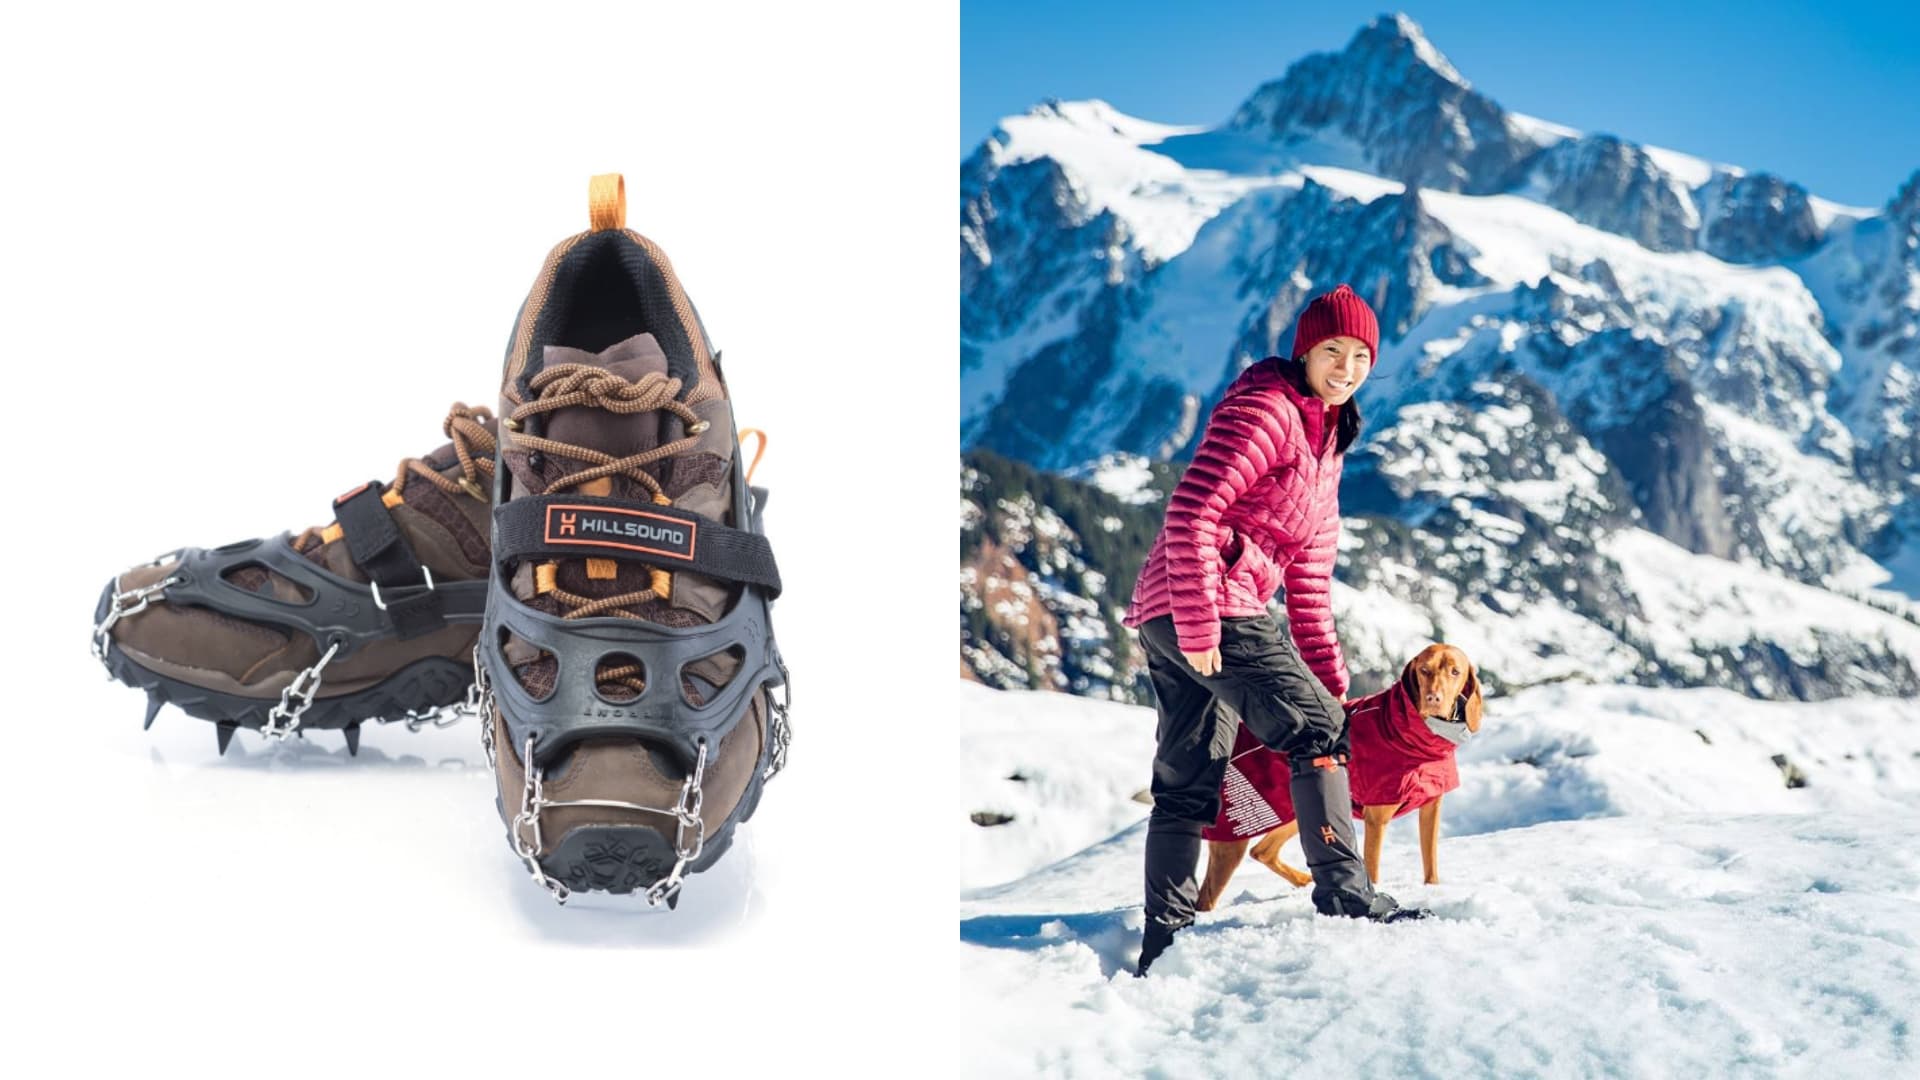 (left) pair of hiking boots with crampons (right) woman in red jacket and dog wearing red coat standing in snow with jagged peaks in the background